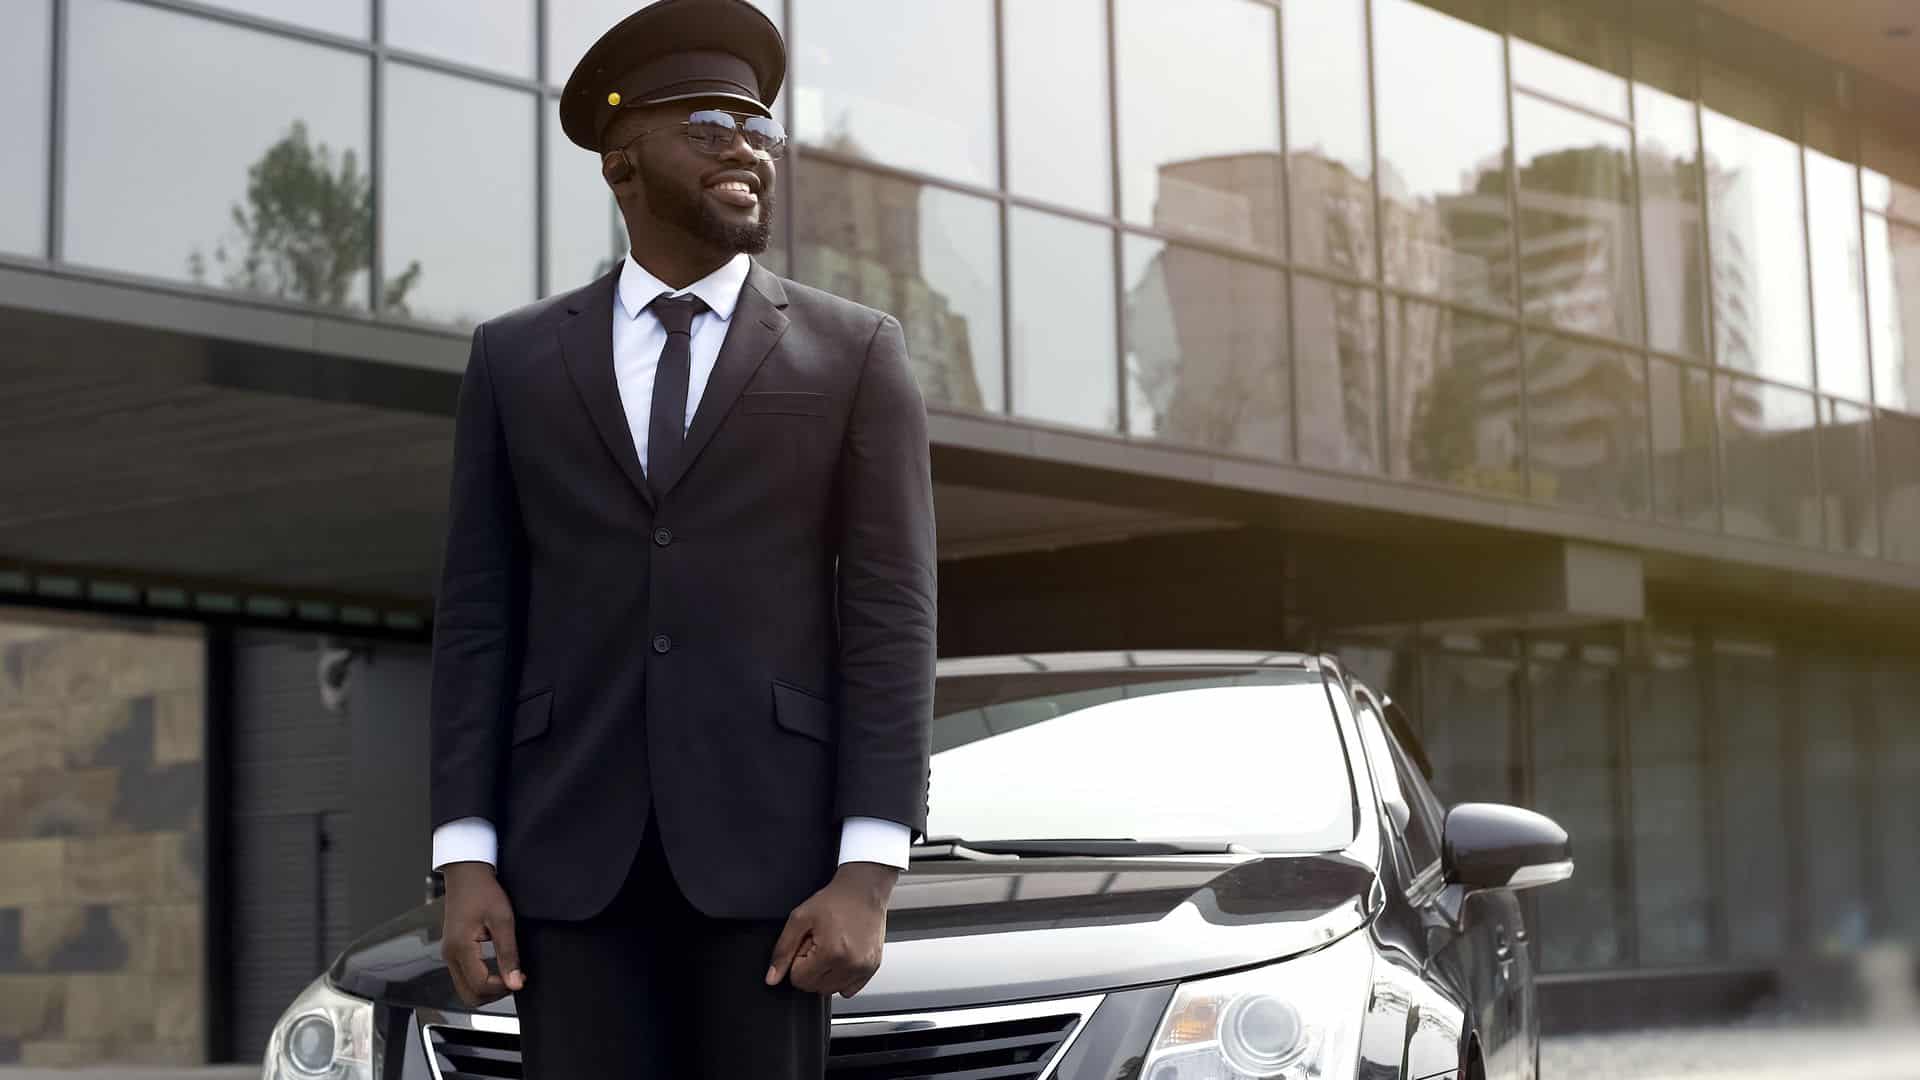 A man in a suit waits for his passengers in front of a private car transfer outside an airport.